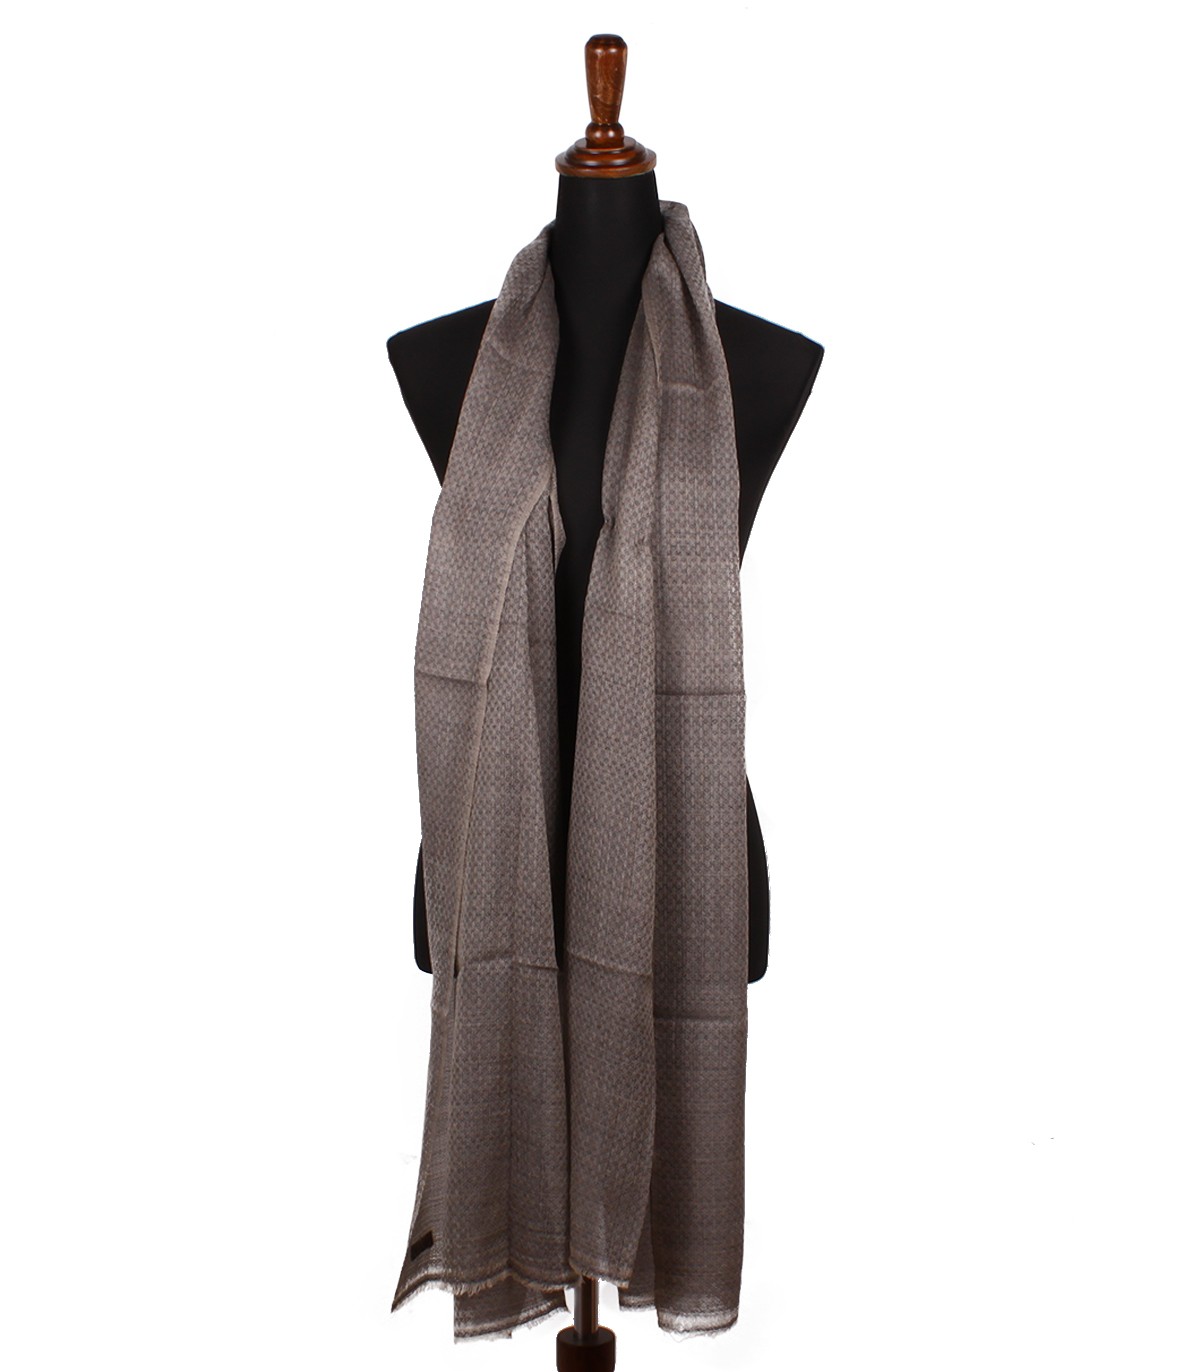 Authentic Grey Cashmere Shawls From Nepal| Buy Pashmina Shawls and ...